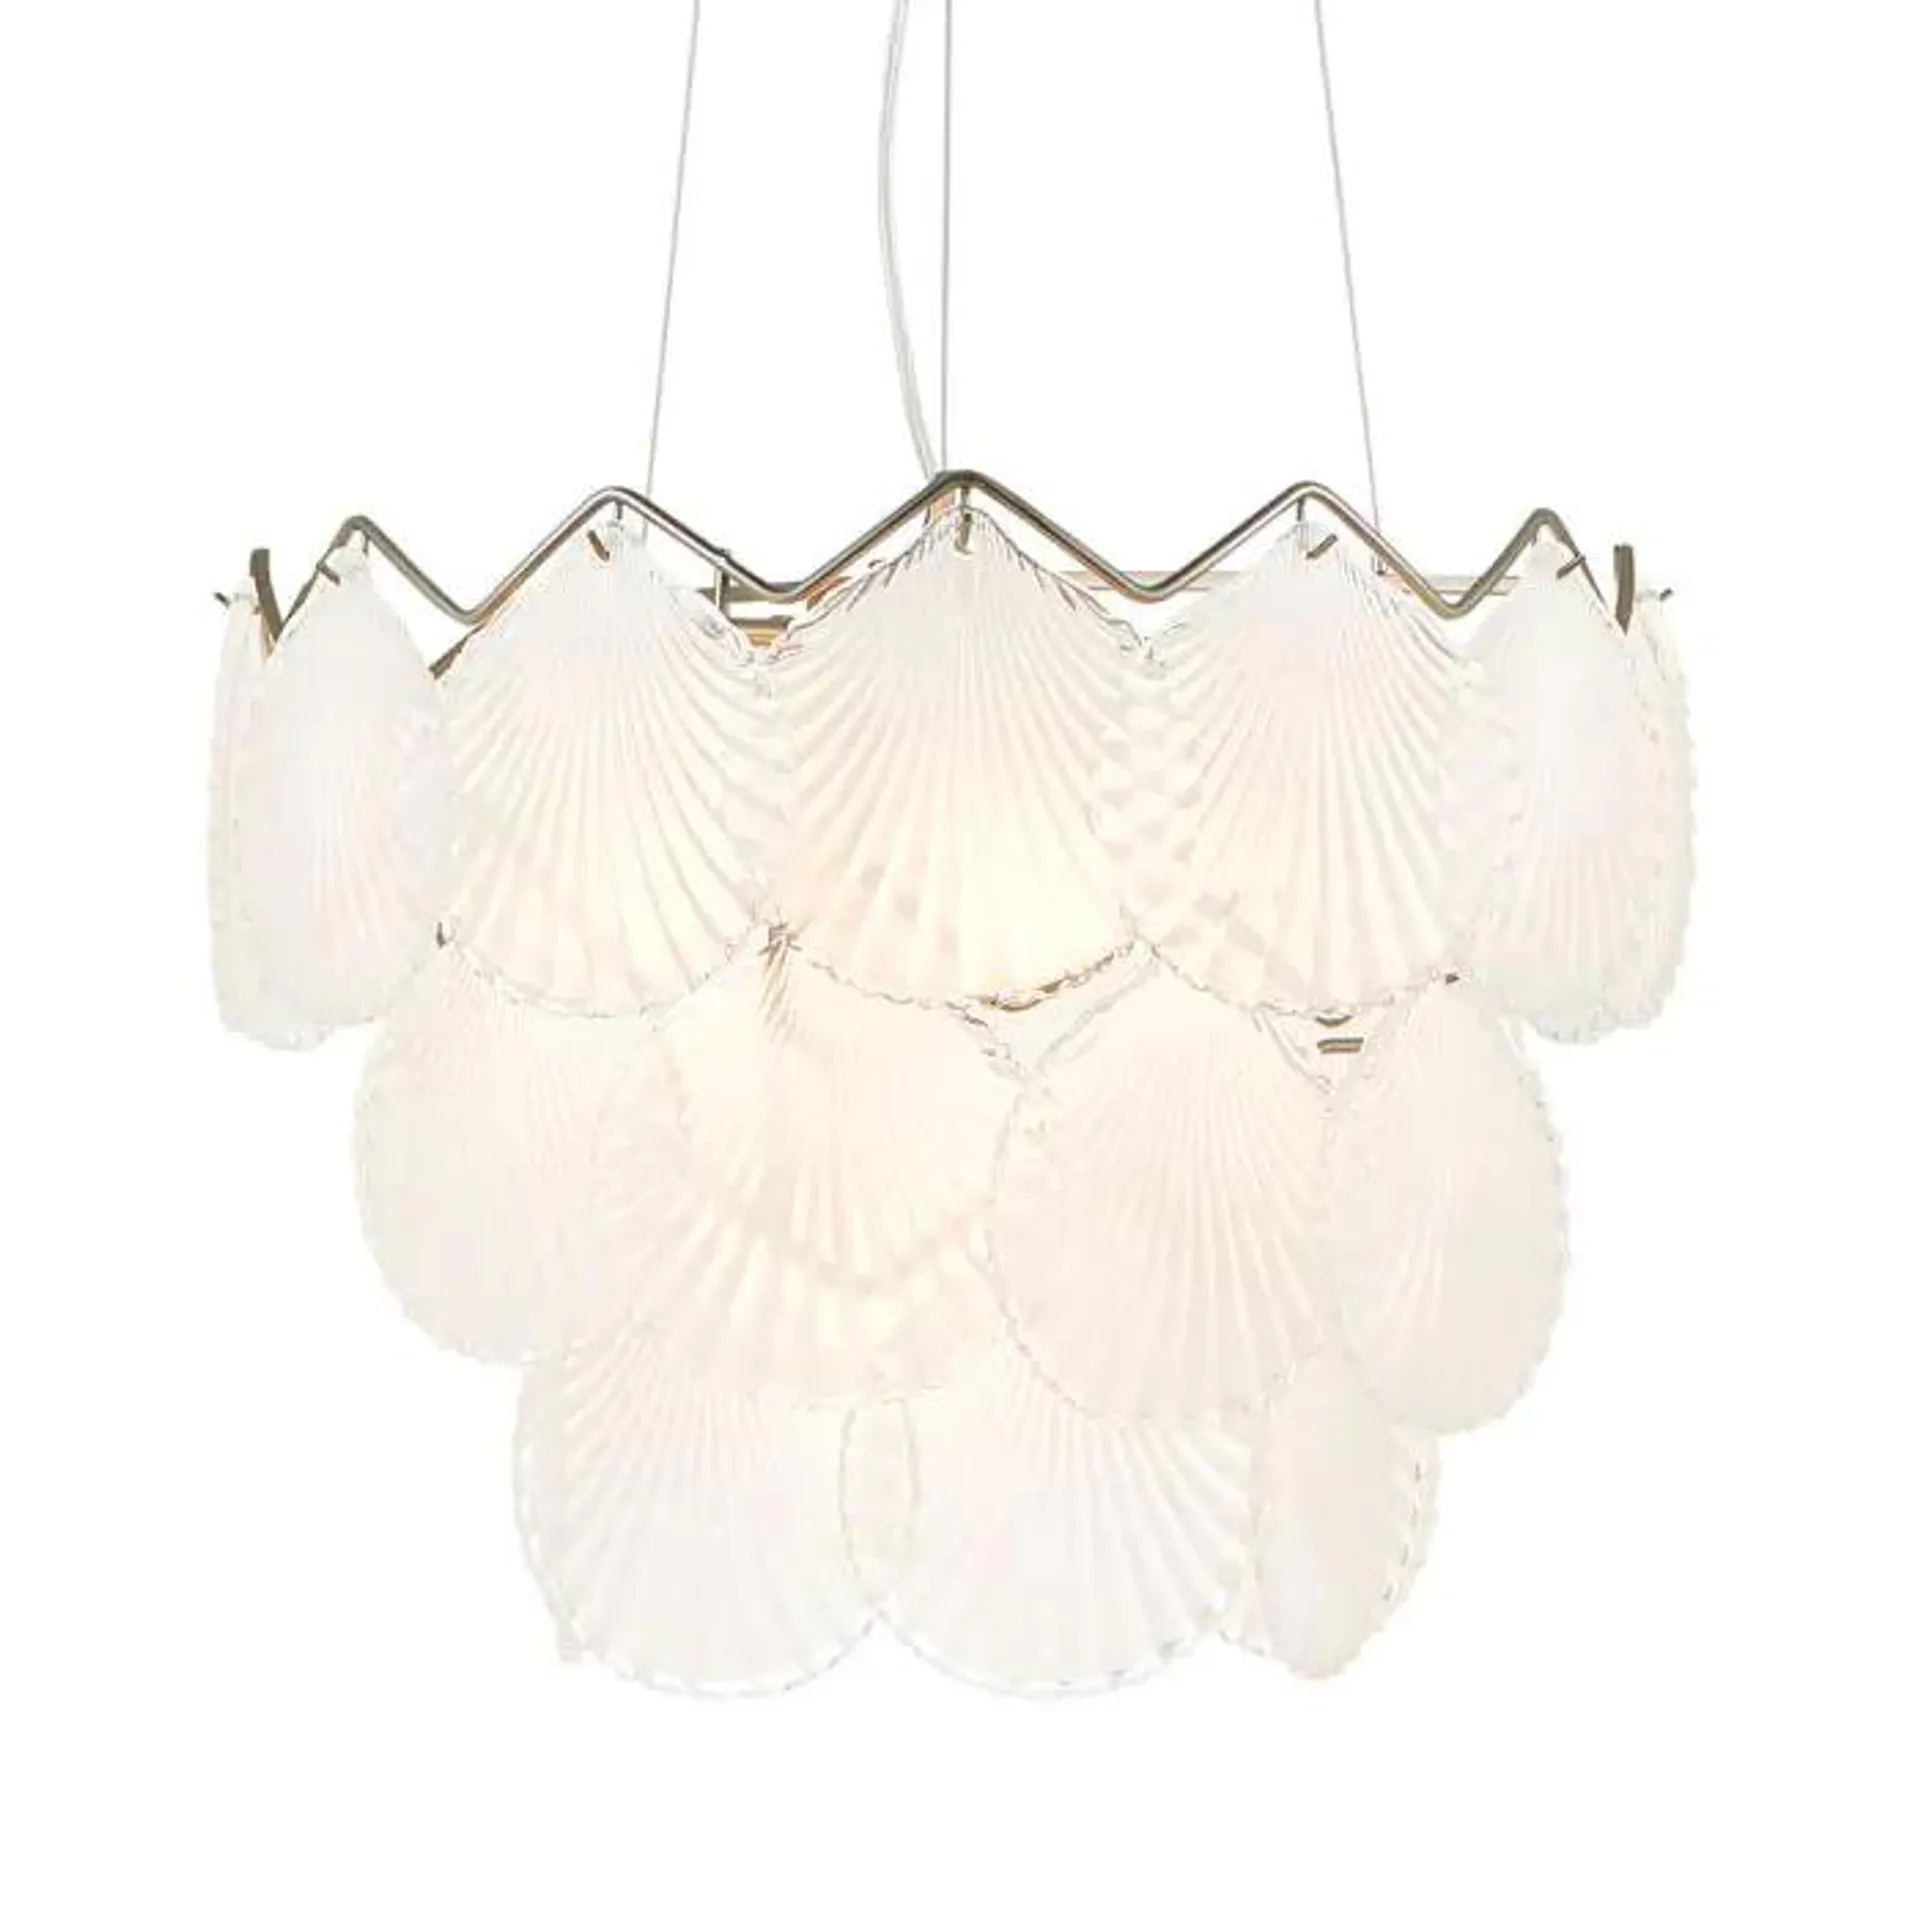 Ellie Glass Disc 3 Tier Chandelier, Frosted